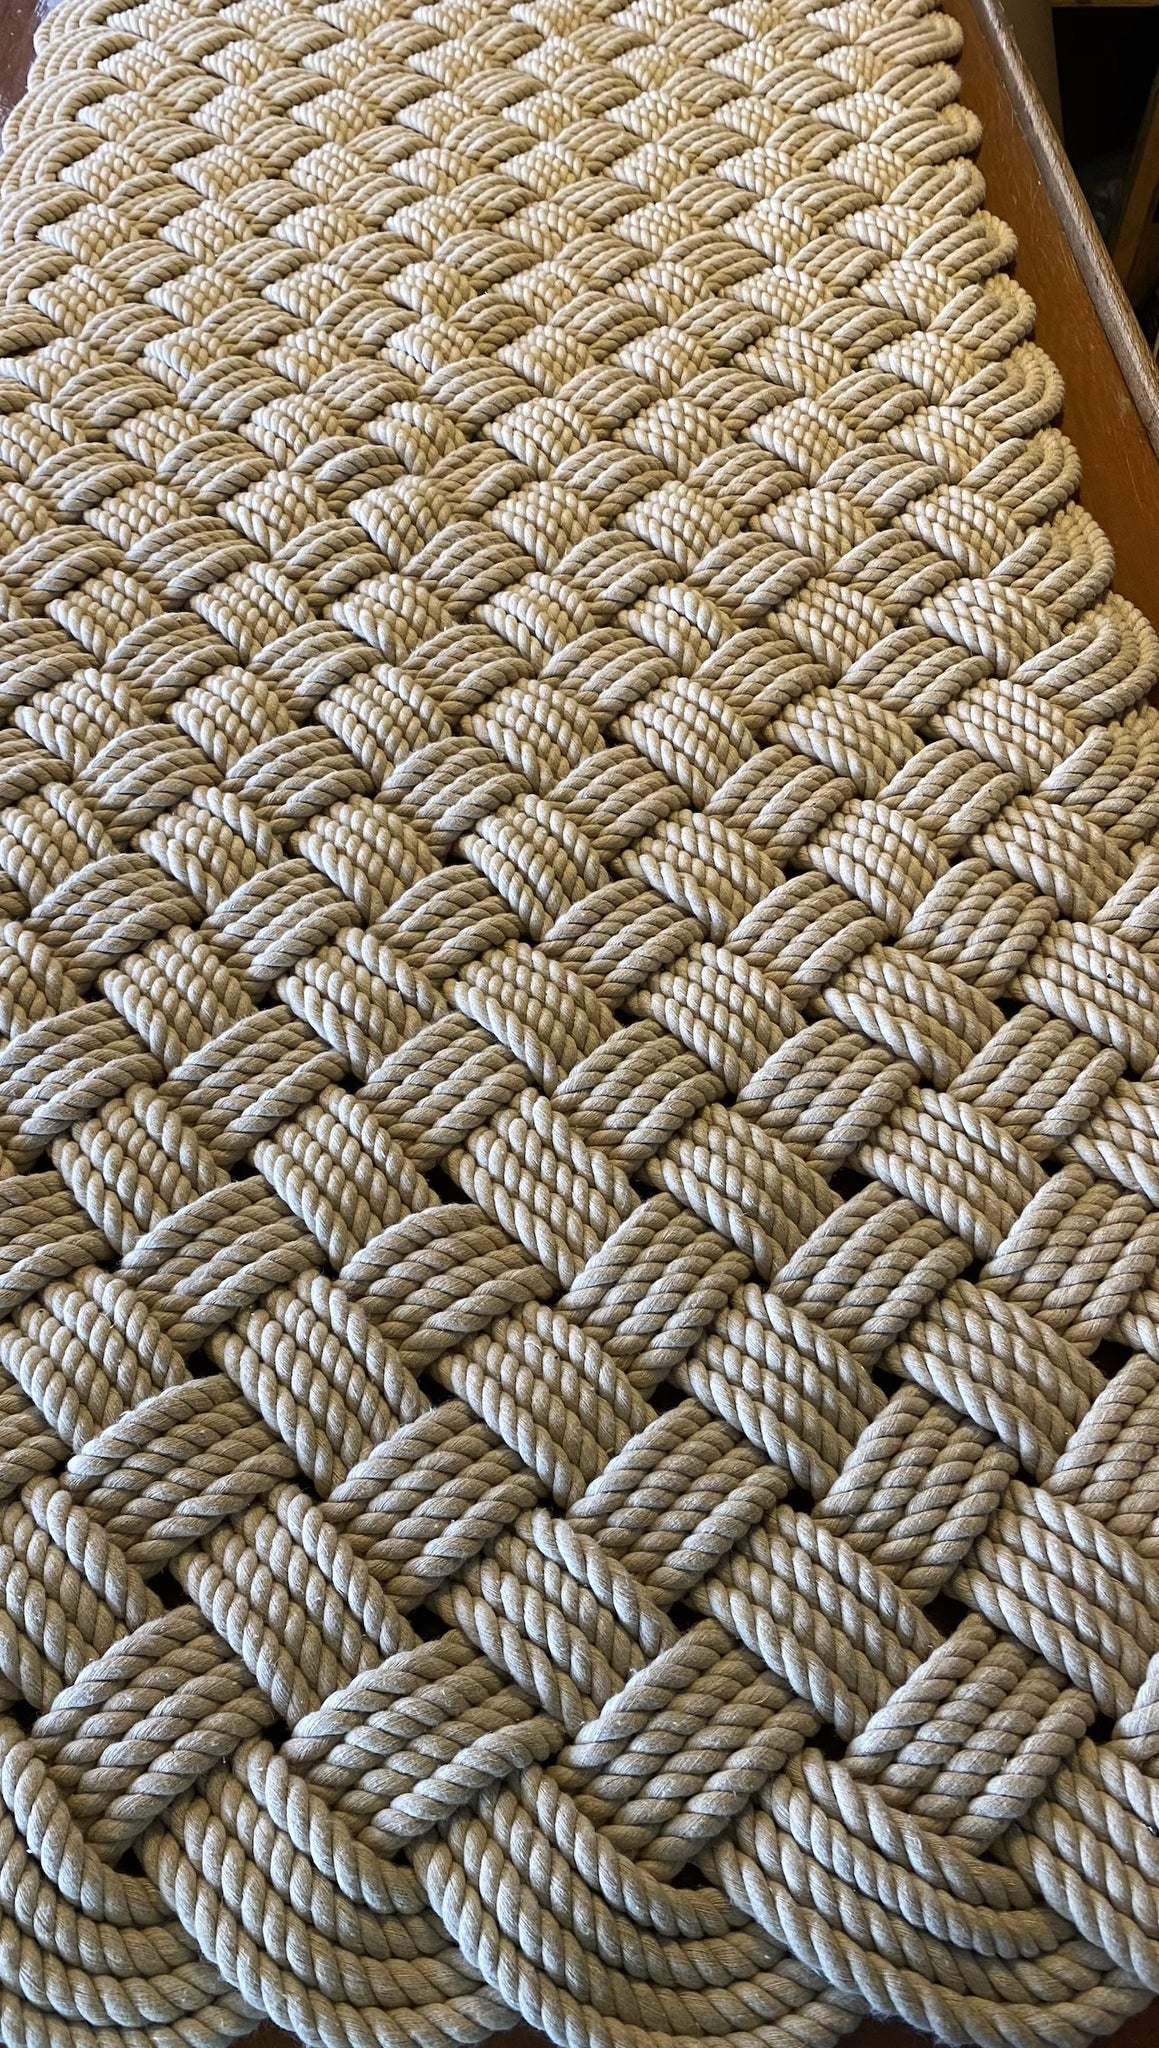 Nautical Rope Rug – Large Bath Mat – Off White 100% Cotton Rope